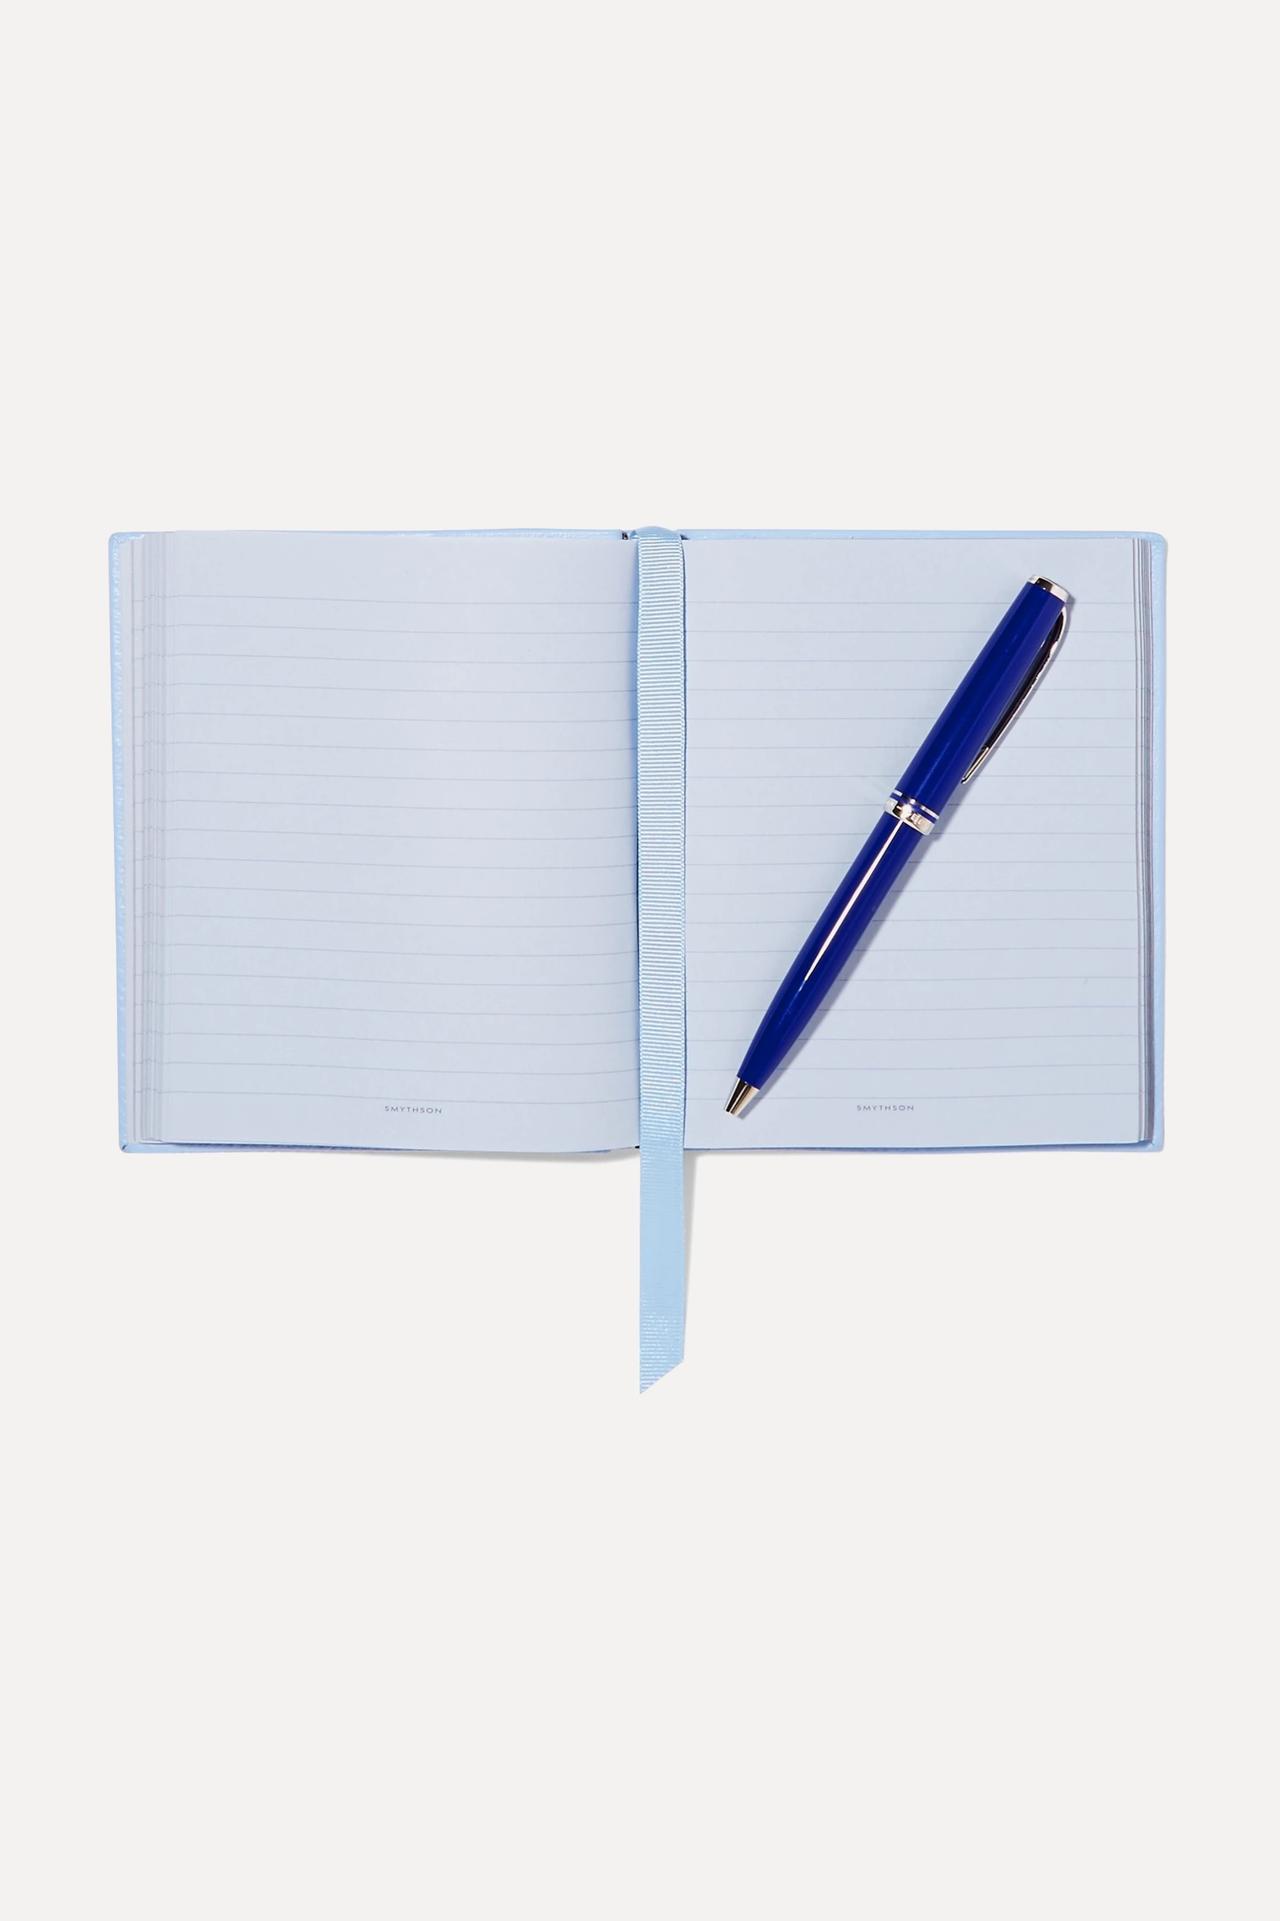 Light blue lined notebook with a royal blue pen on the right hand page